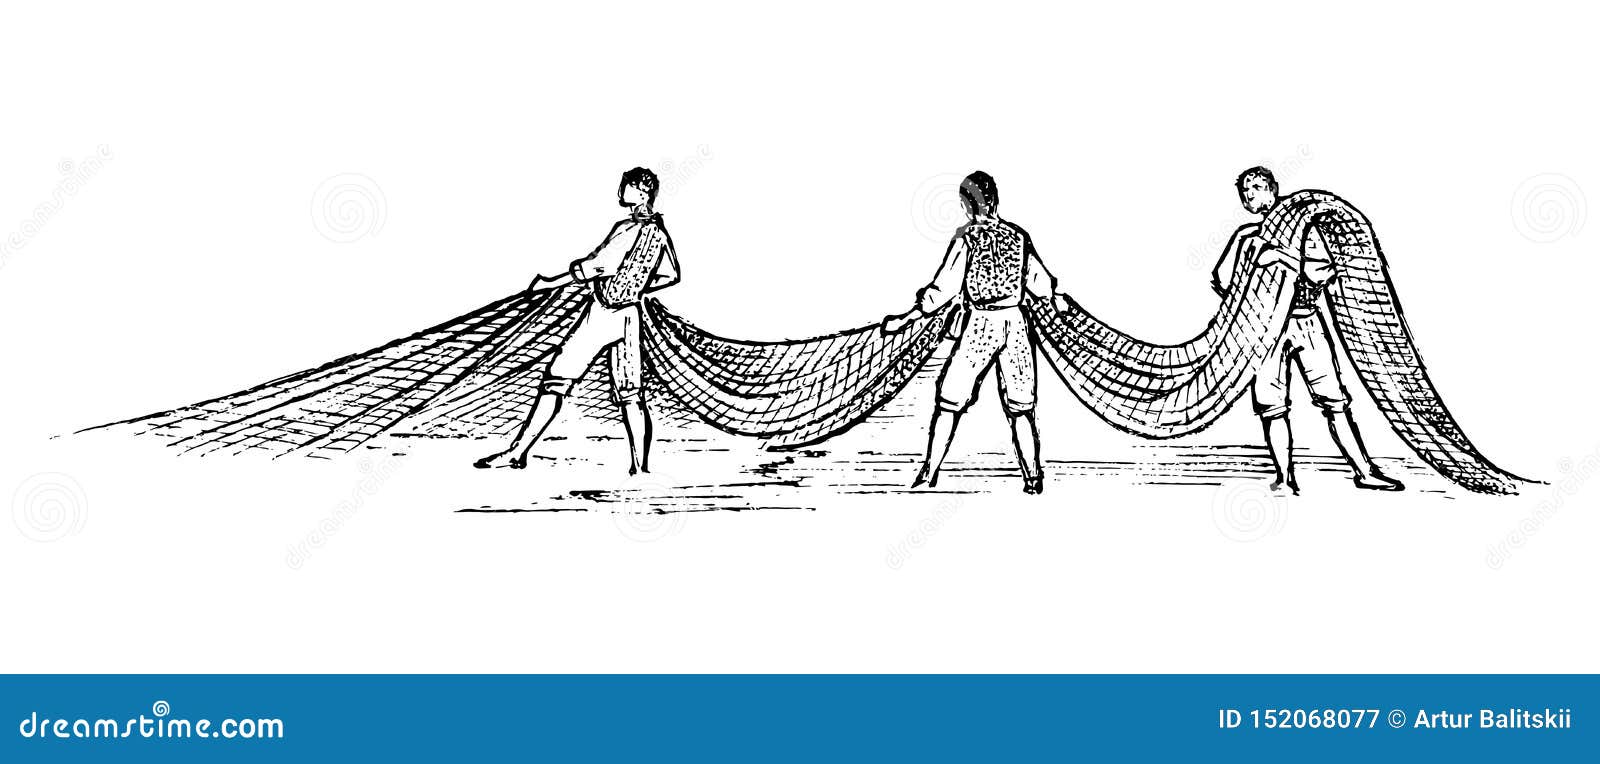 Fishery in Greece. Men with Fishing Nets. Hand Drawn Engraved Vintage Sketch  for Poster, Banner or Website. Stock Vector - Illustration of pike, lake:  152068077